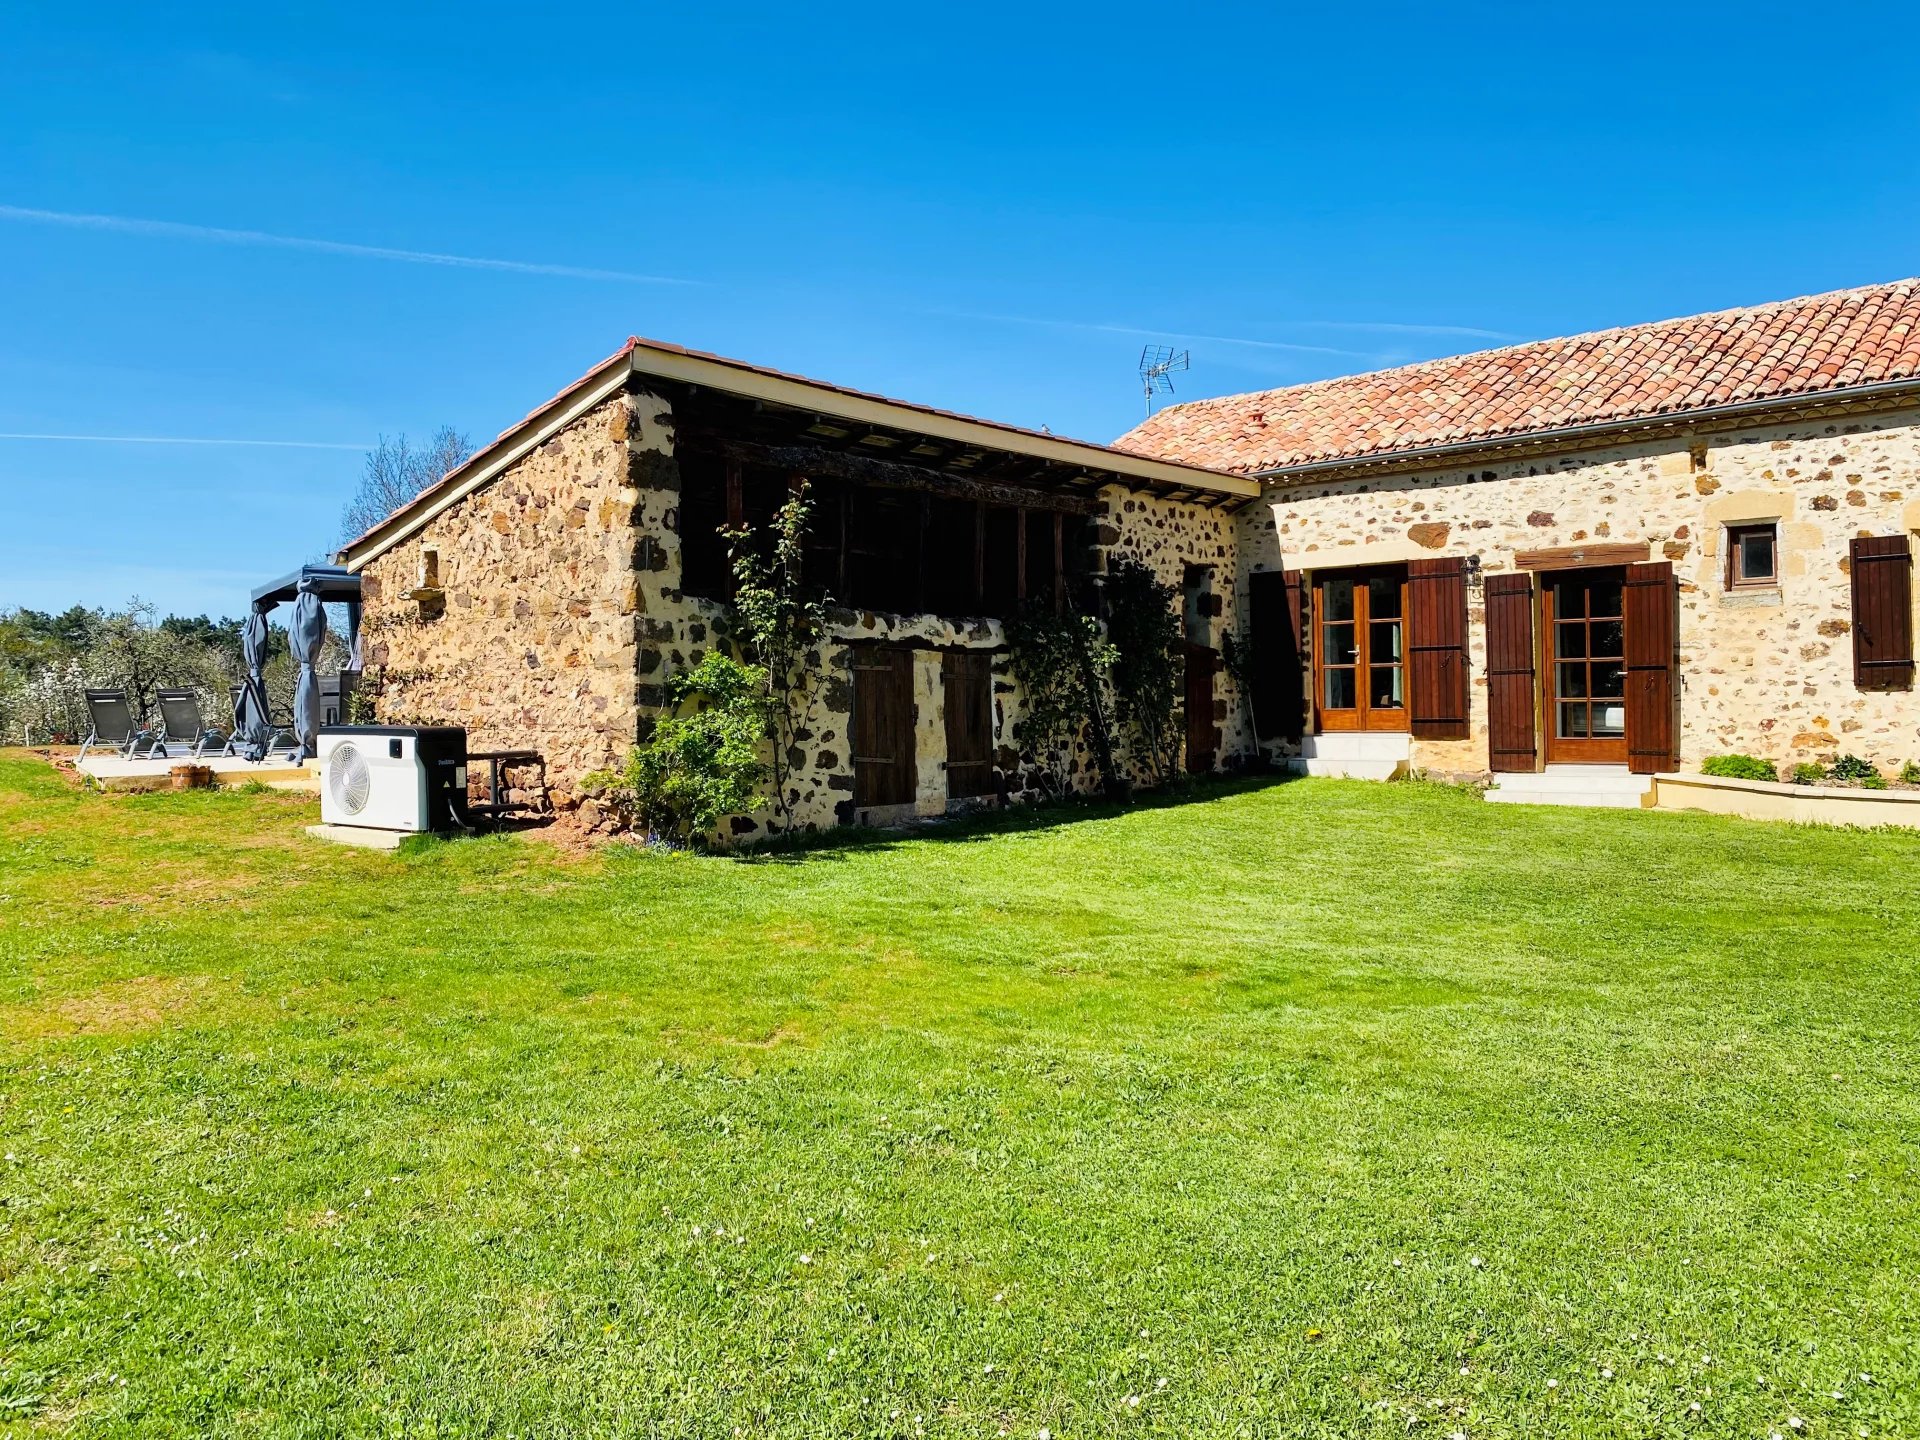 Complex of 3 Houses and Two Heated Pools - 5 minutes from Monpazier, Dordogne